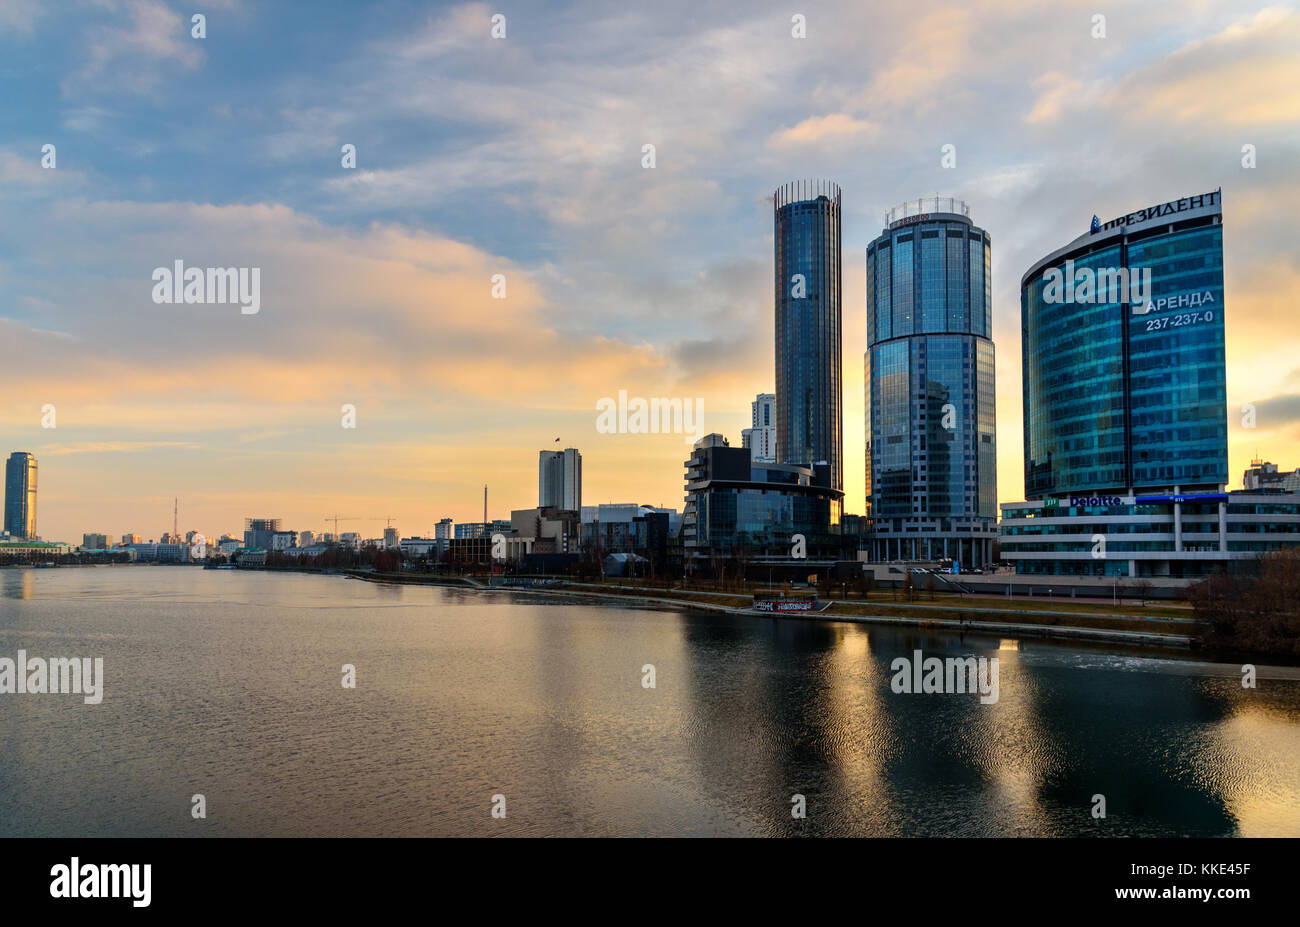 Yekaterinburg, Russia - 11 November, 2017: View of commercial district Yekaterinburg-City on sunset. With Buildings of Regional Government and Parliam Stock Photo